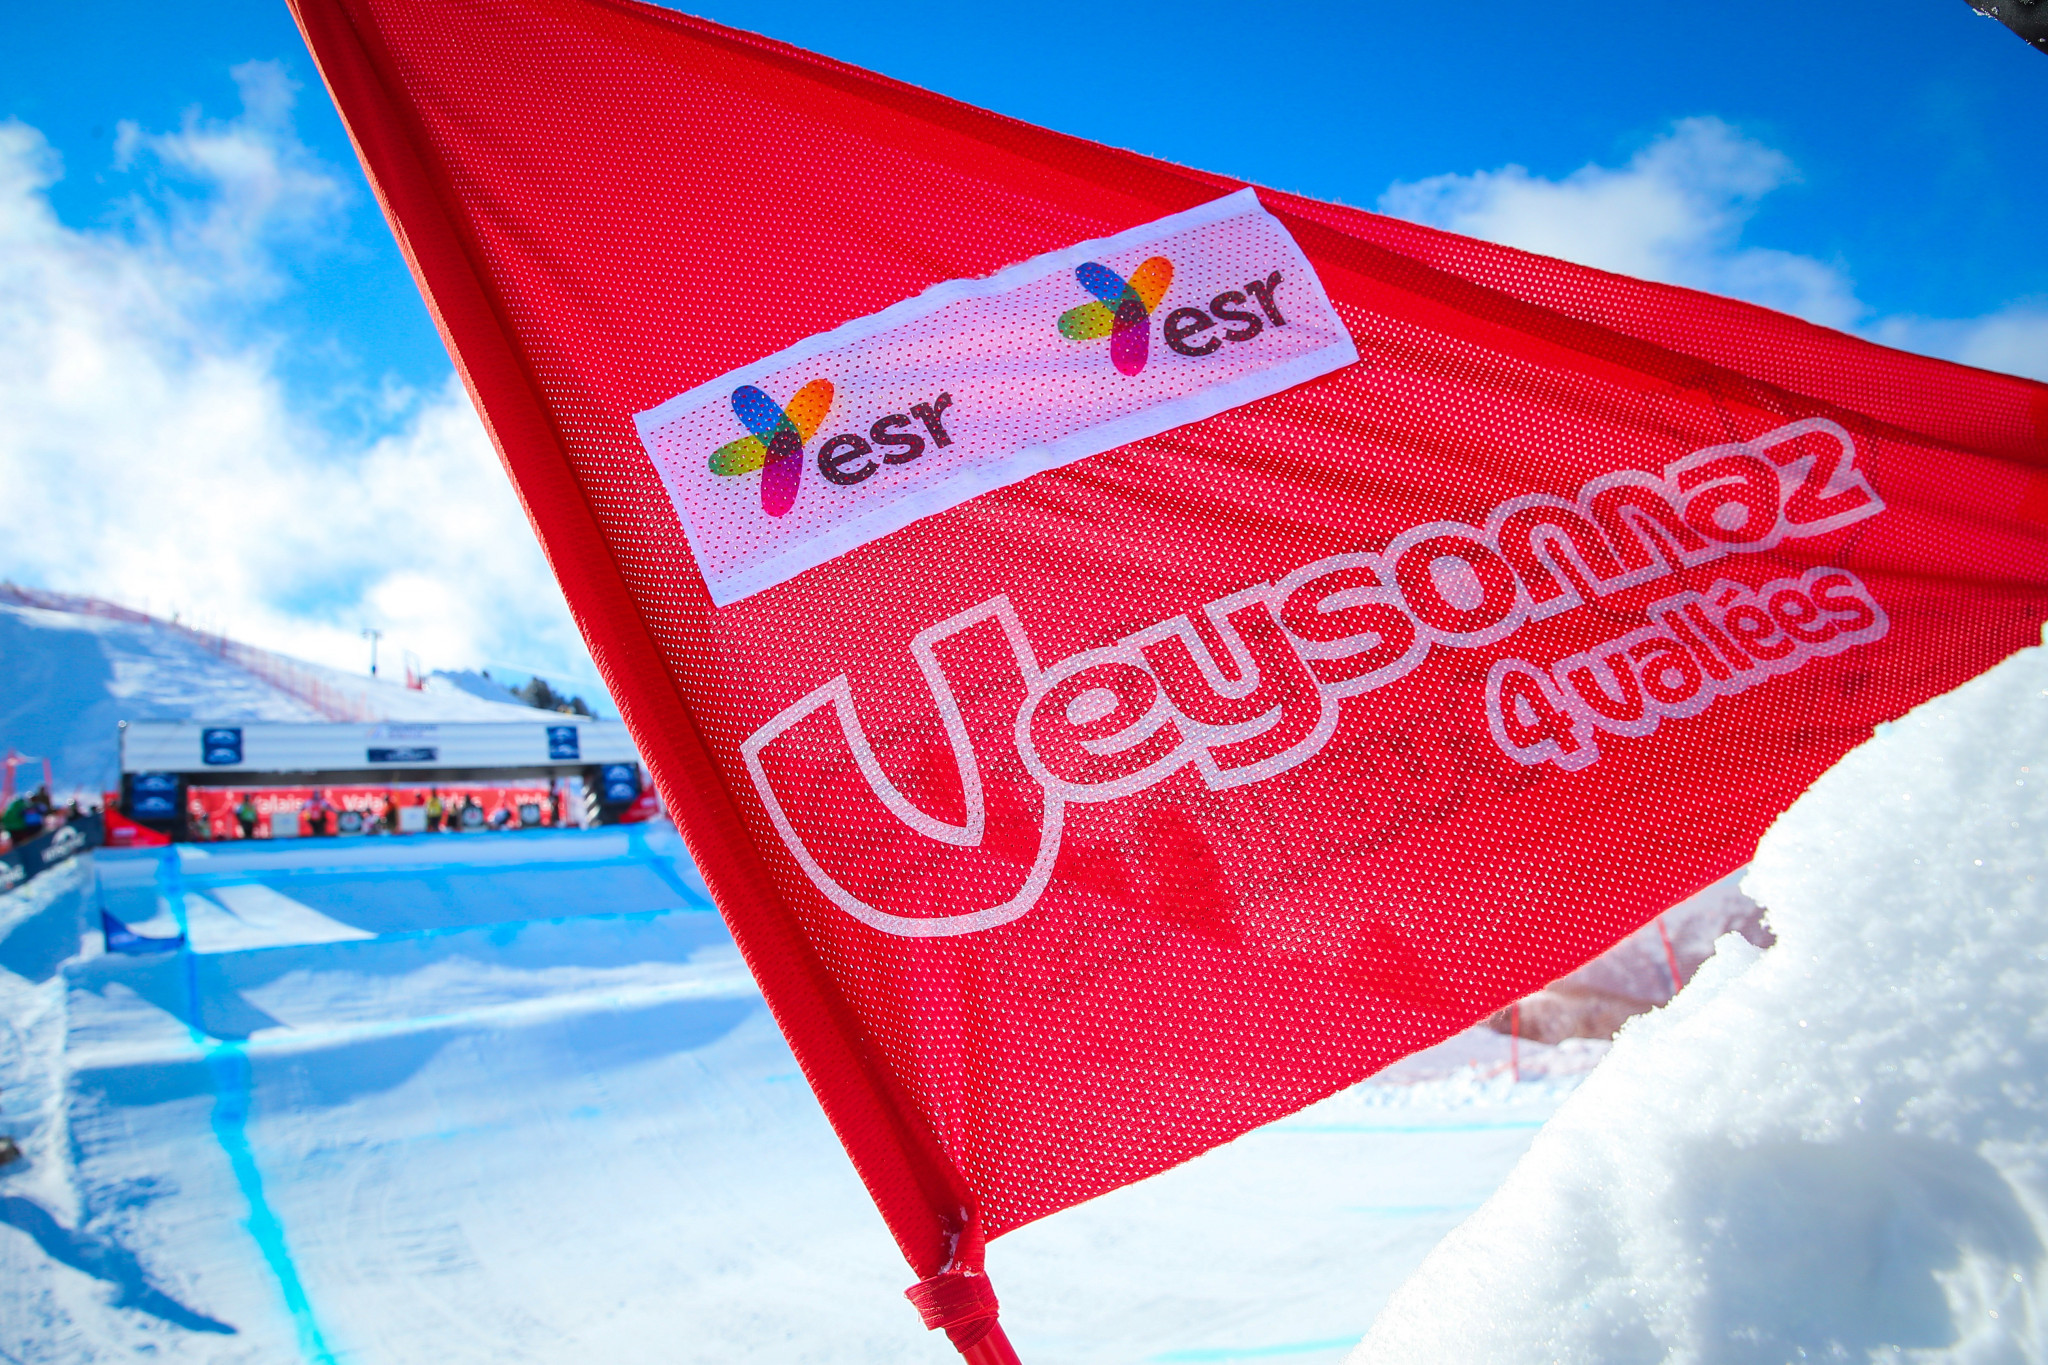 Veysonnaz in Switzerland hosted the final event of the Ski Cross and Snowboard Cross World Cup seasons ©Getty Images 